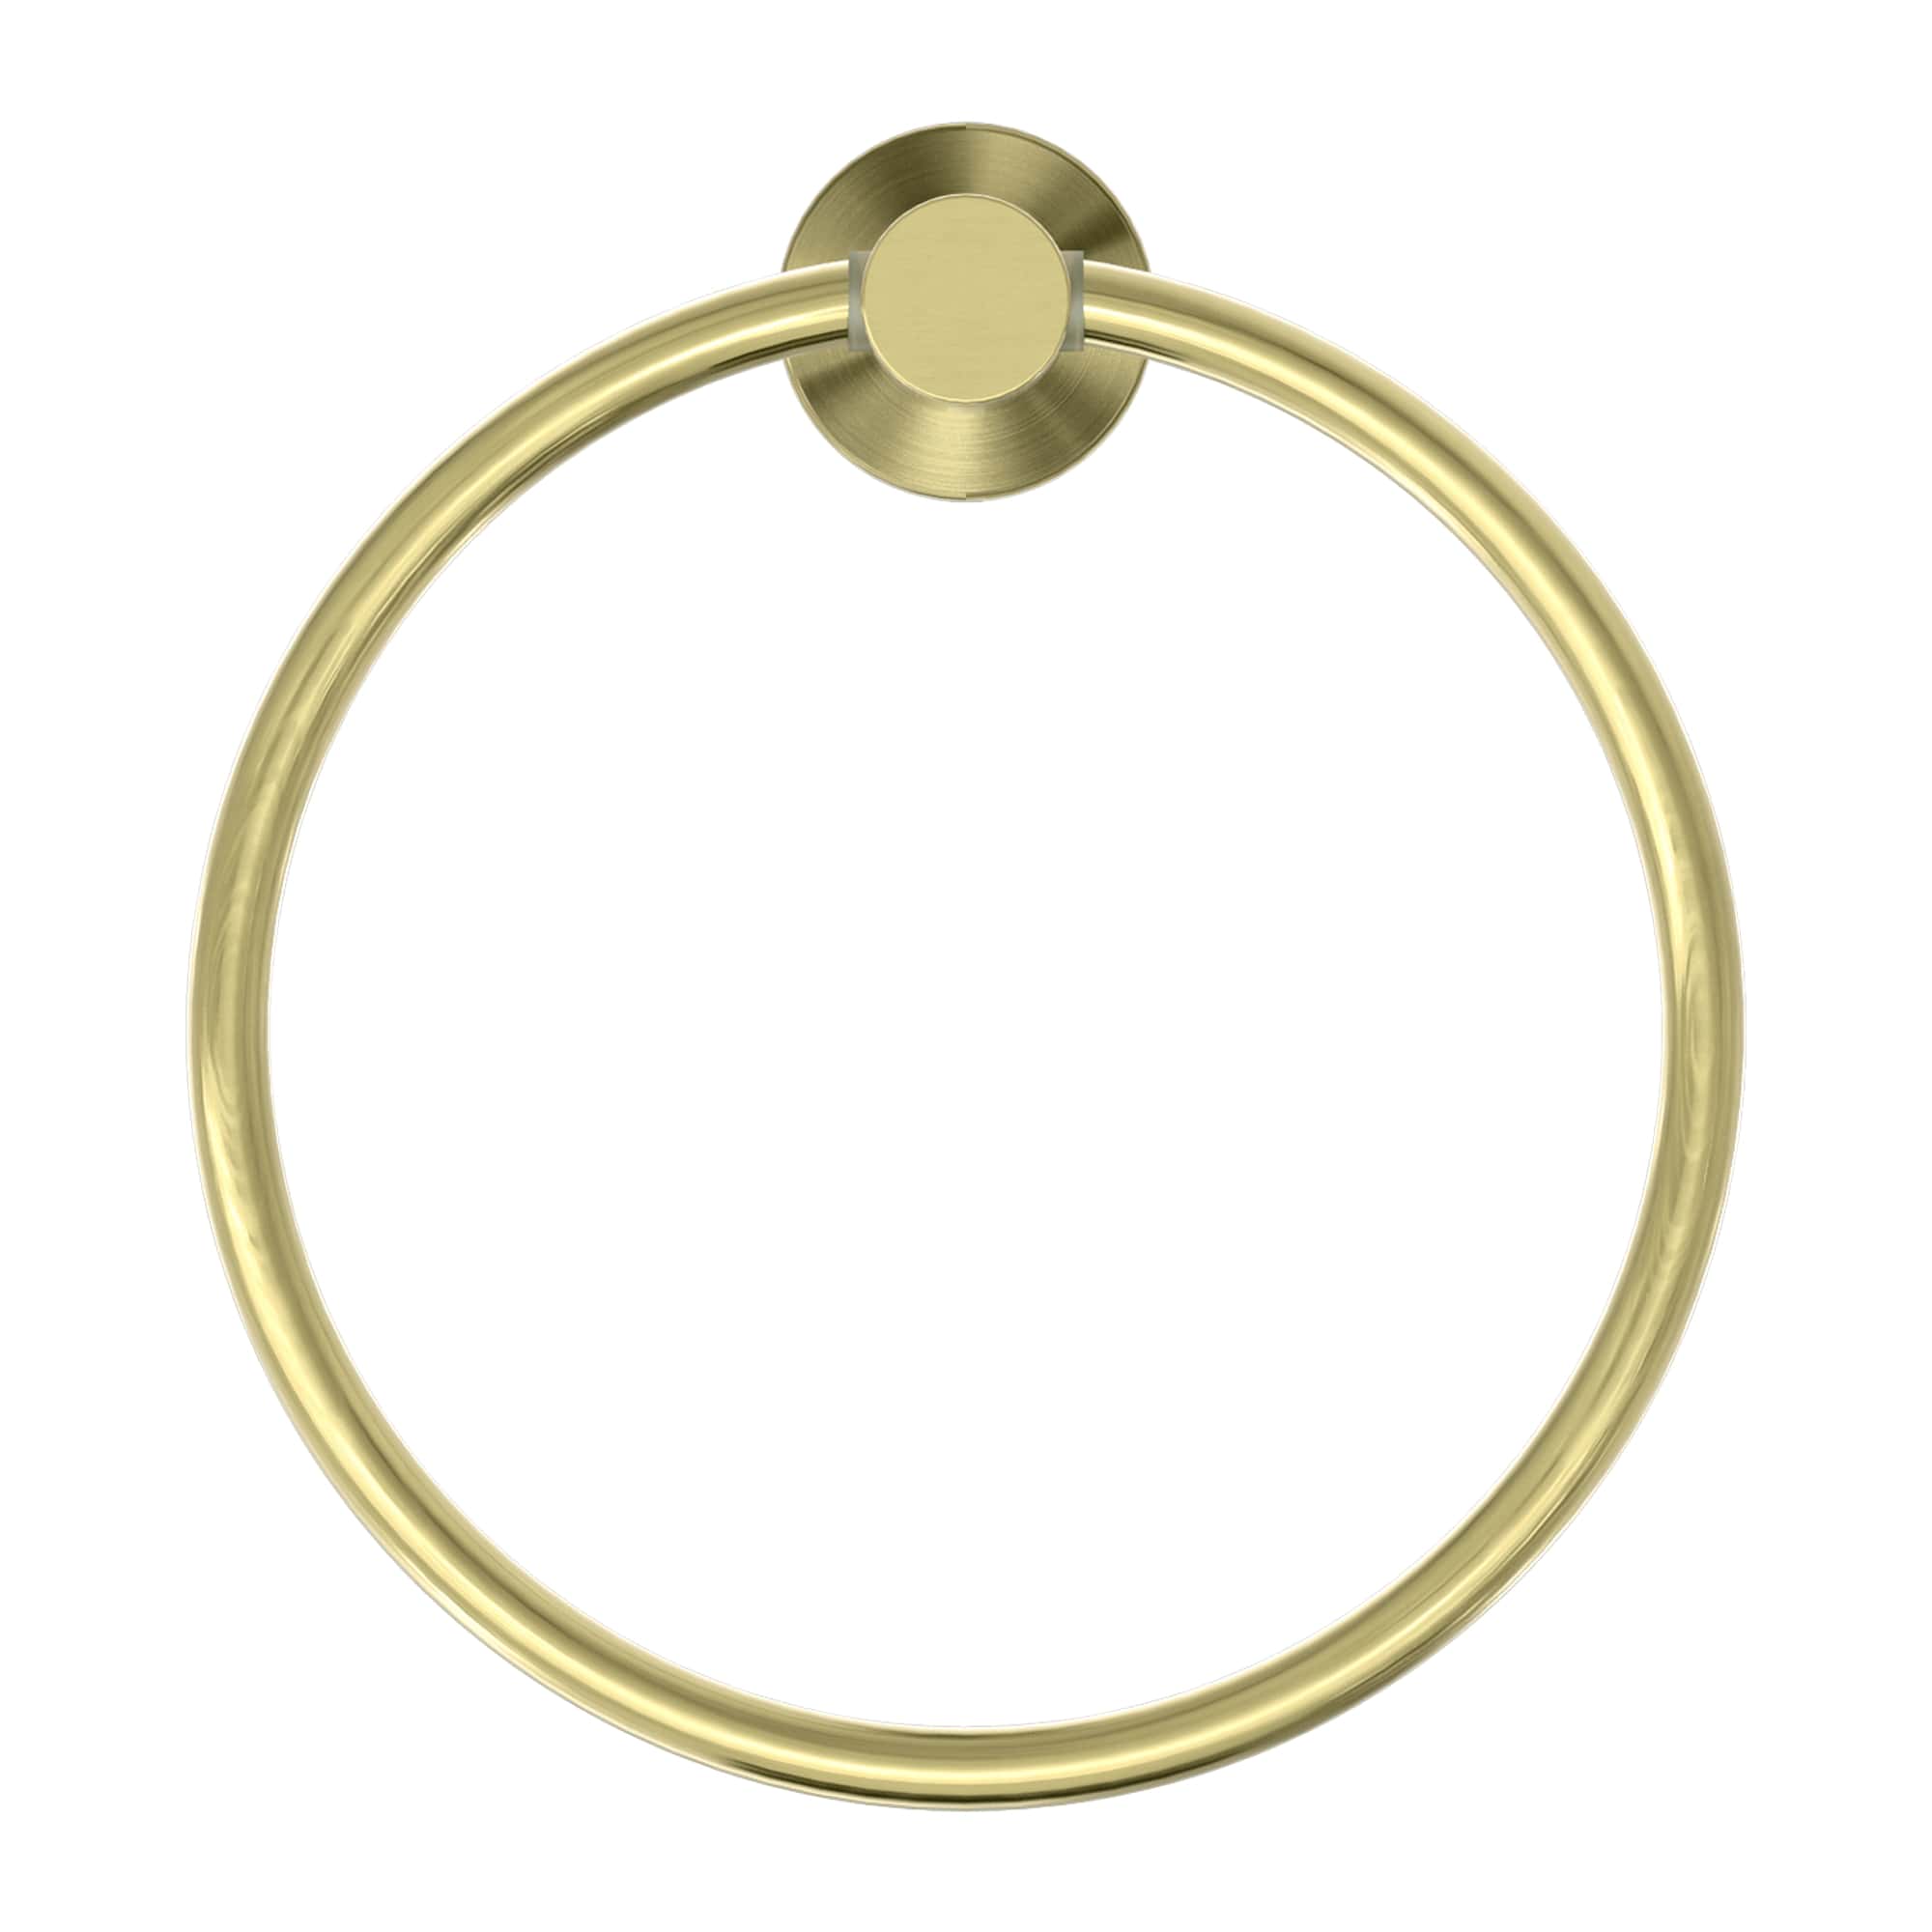 NERO MECCA HAND TOWEL RING BRUSHED GOLD